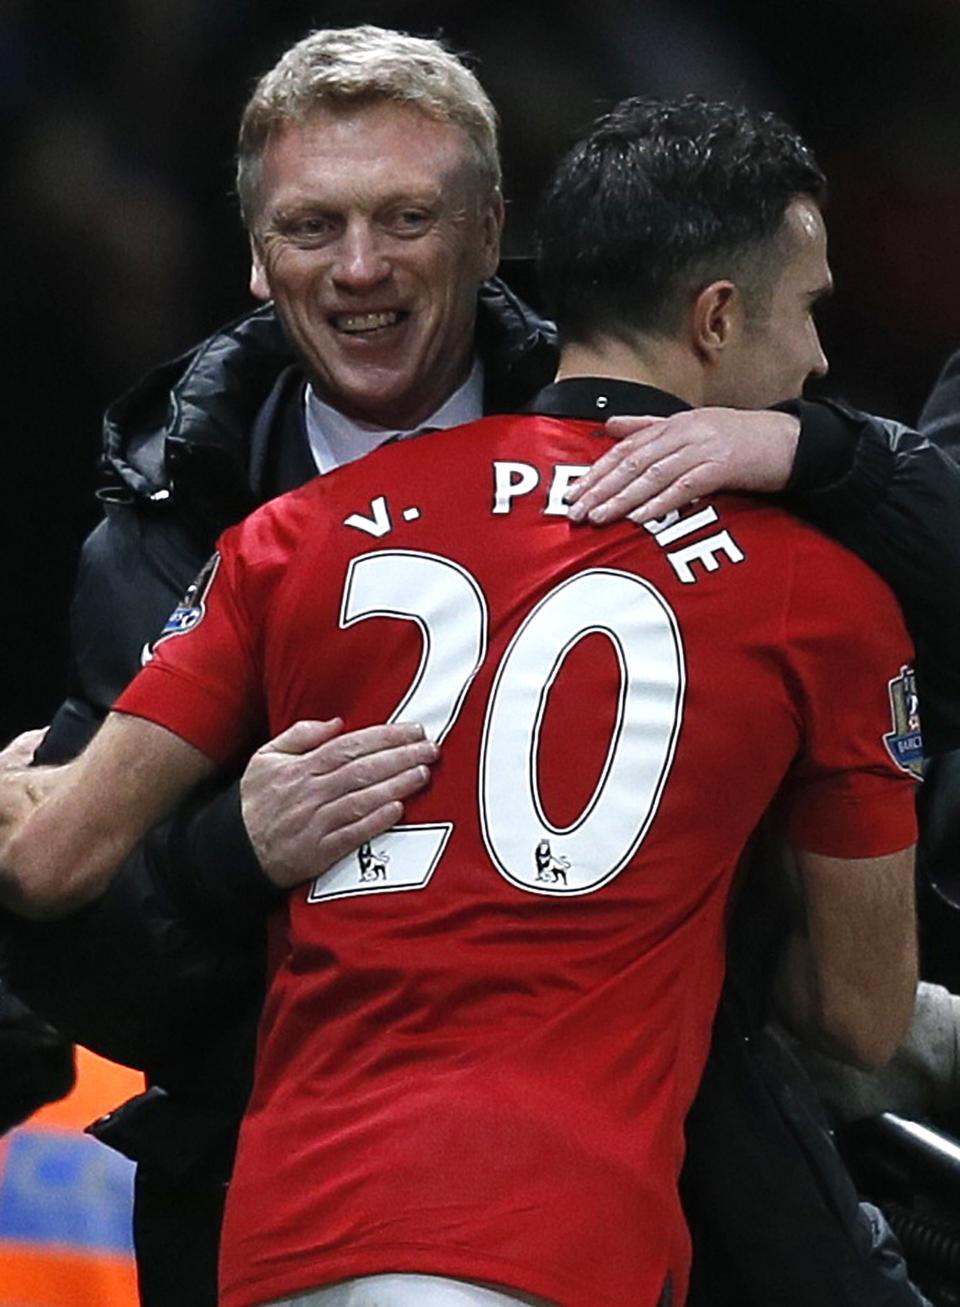 Manchester United's manager David Moyes (L) celebrates with Robin van Persie after their English Premier League soccer match against Arsenal at Old Trafford in Manchester, northern England, November 10, 2013.